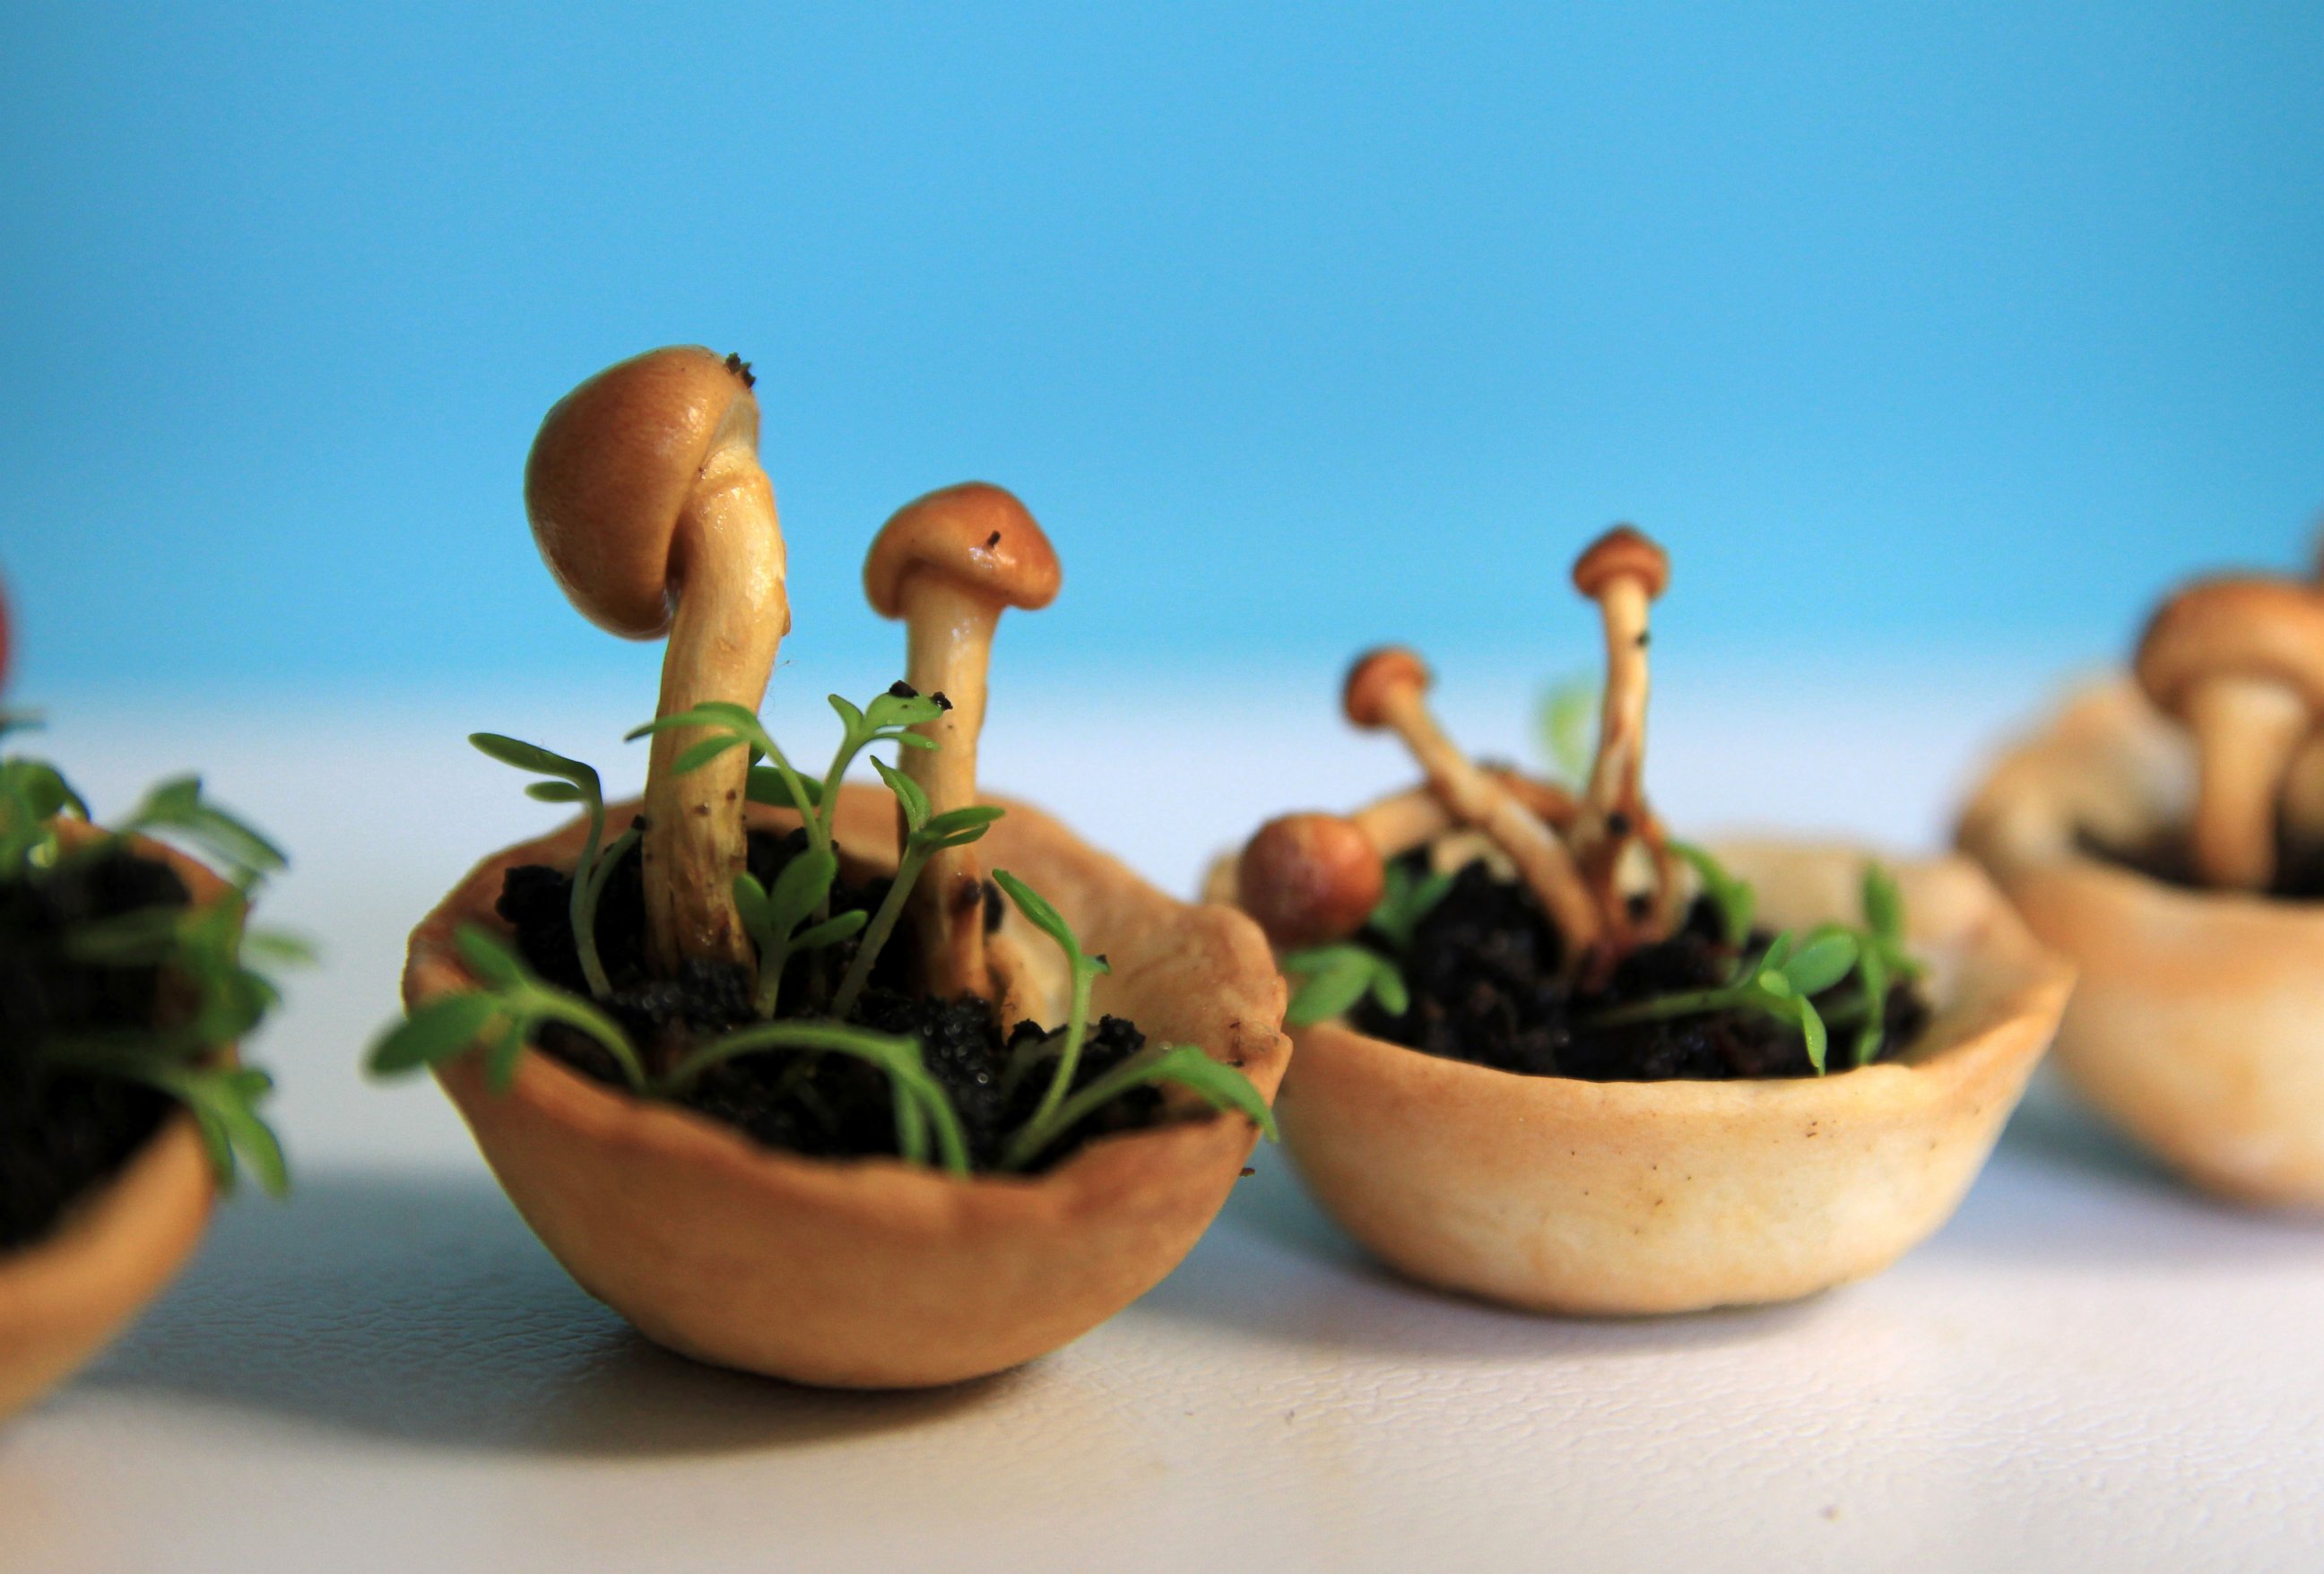 PHOTO: Chloe Rutzerveld designed the Edible Growth project to show 3D food can be healthy.
